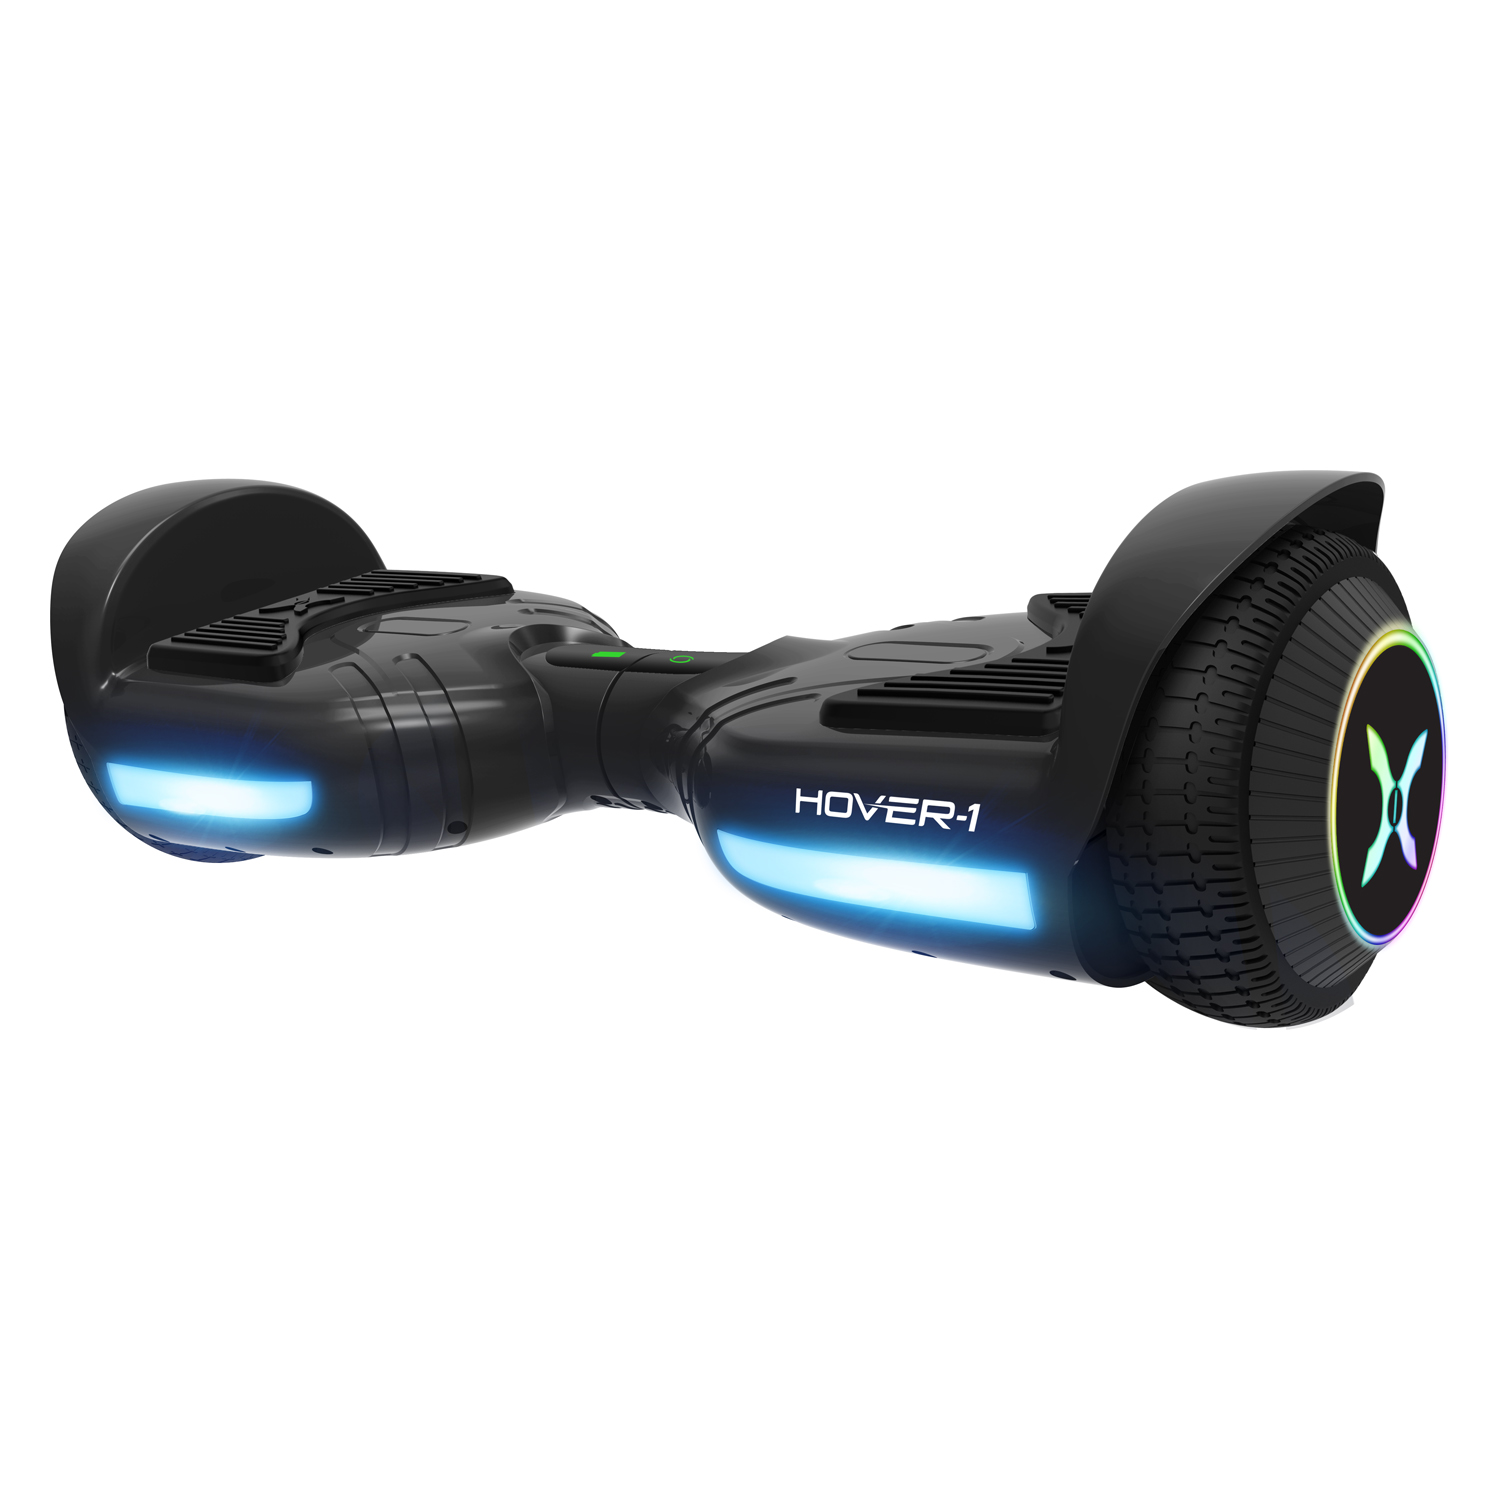 Hover-1 Blast Hoverboard, LED Lights, 160 lbs Max Weight, 7 mph Max Speed, Black - image 1 of 5